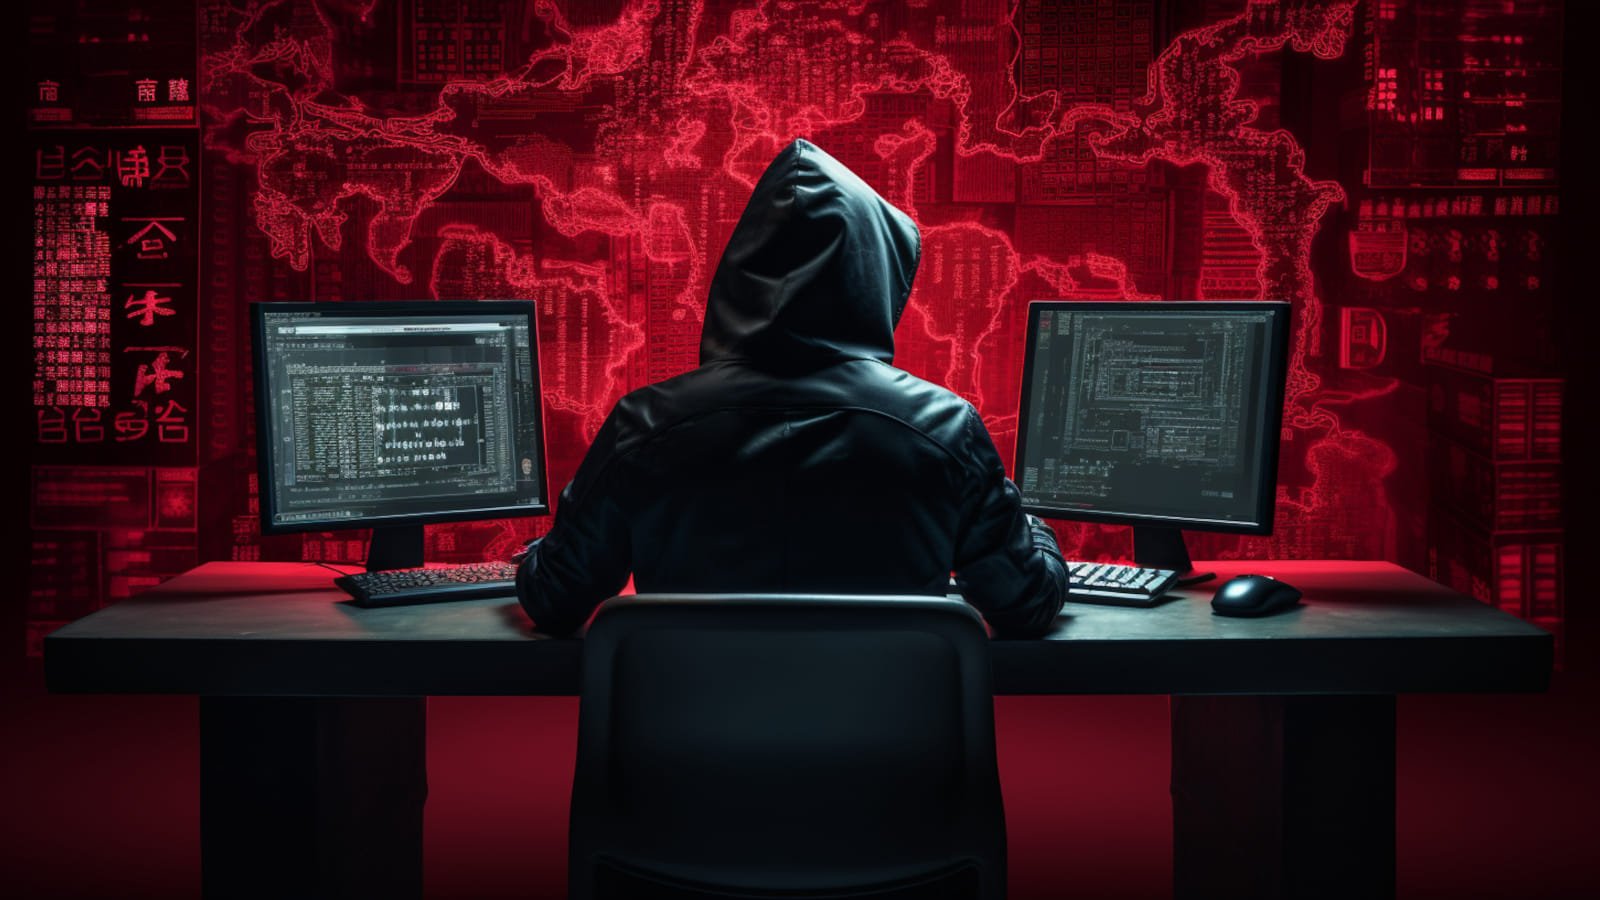 Budworm hackers target telcos and govt orgs with custom malware – Source: www.bleepingcomputer.com